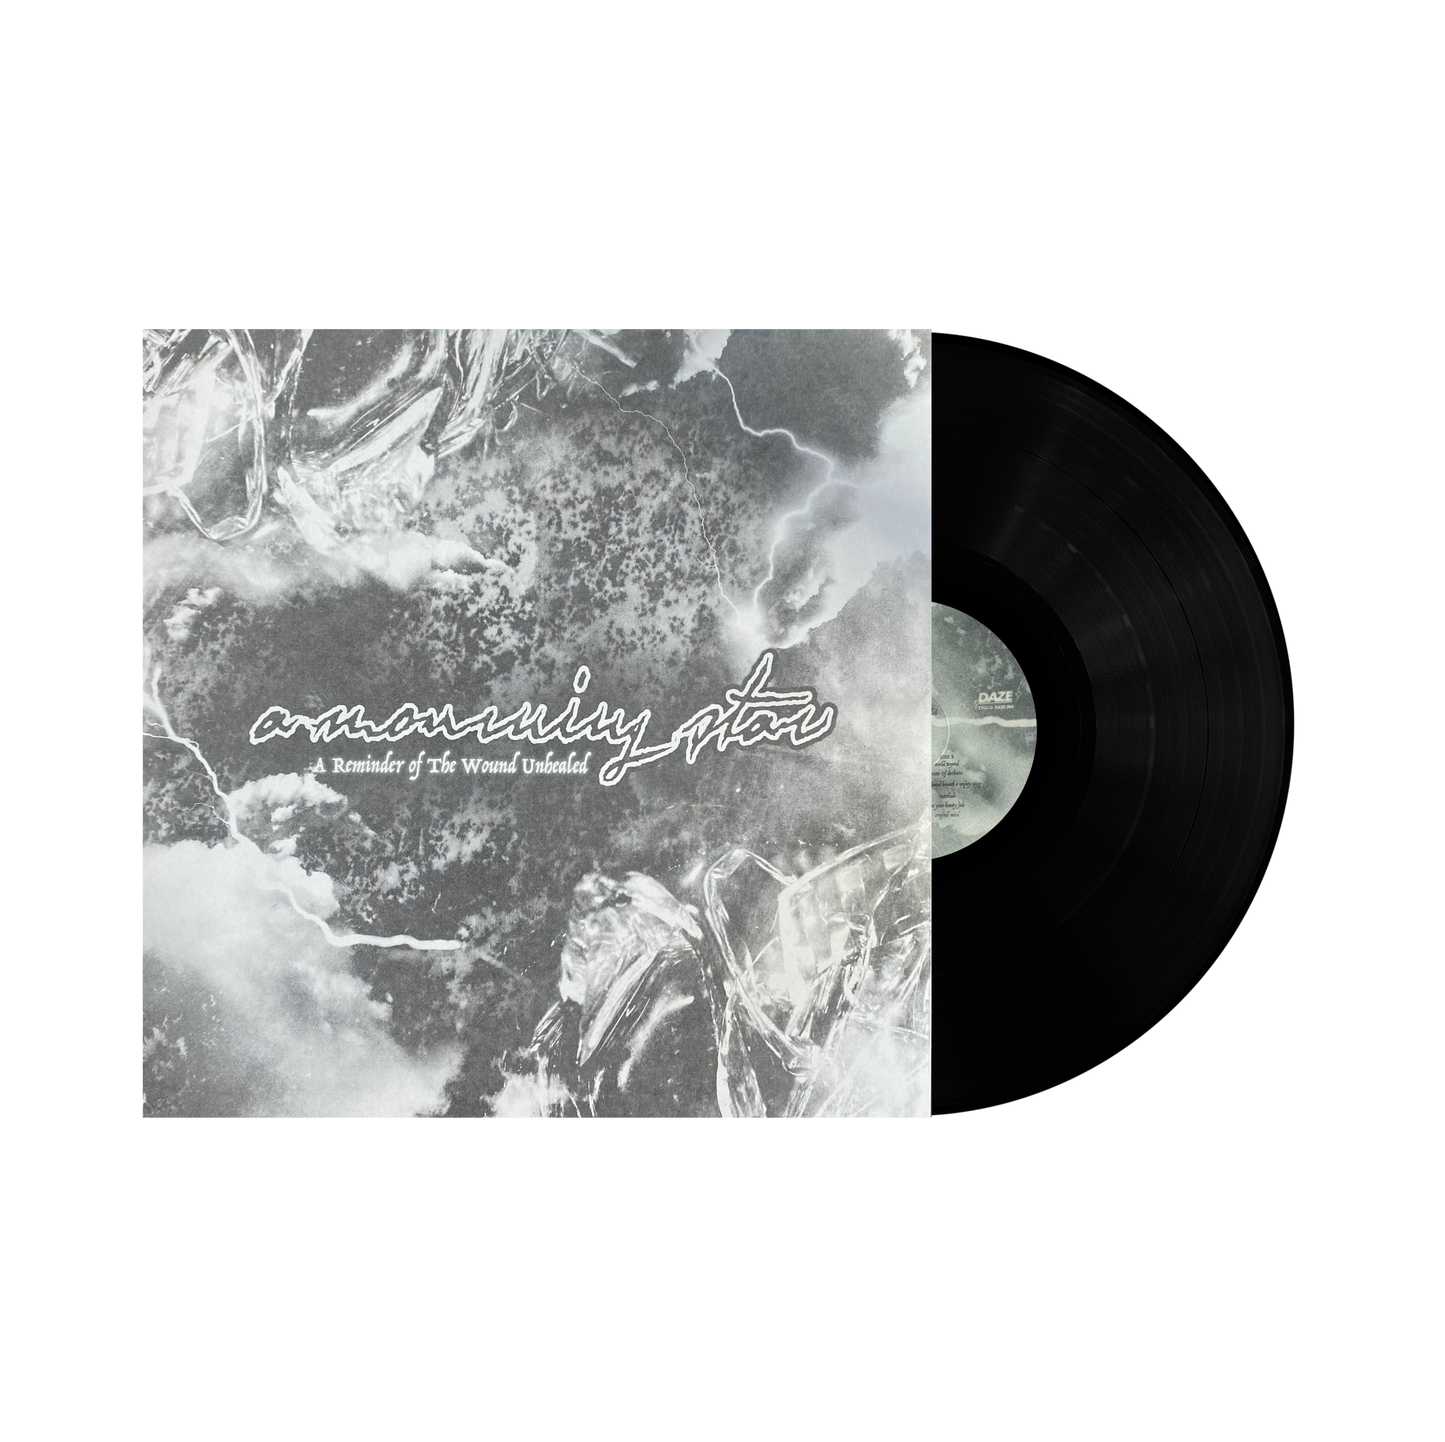 A Mourning Star "A Reminder of The Wound Unhealed" LP